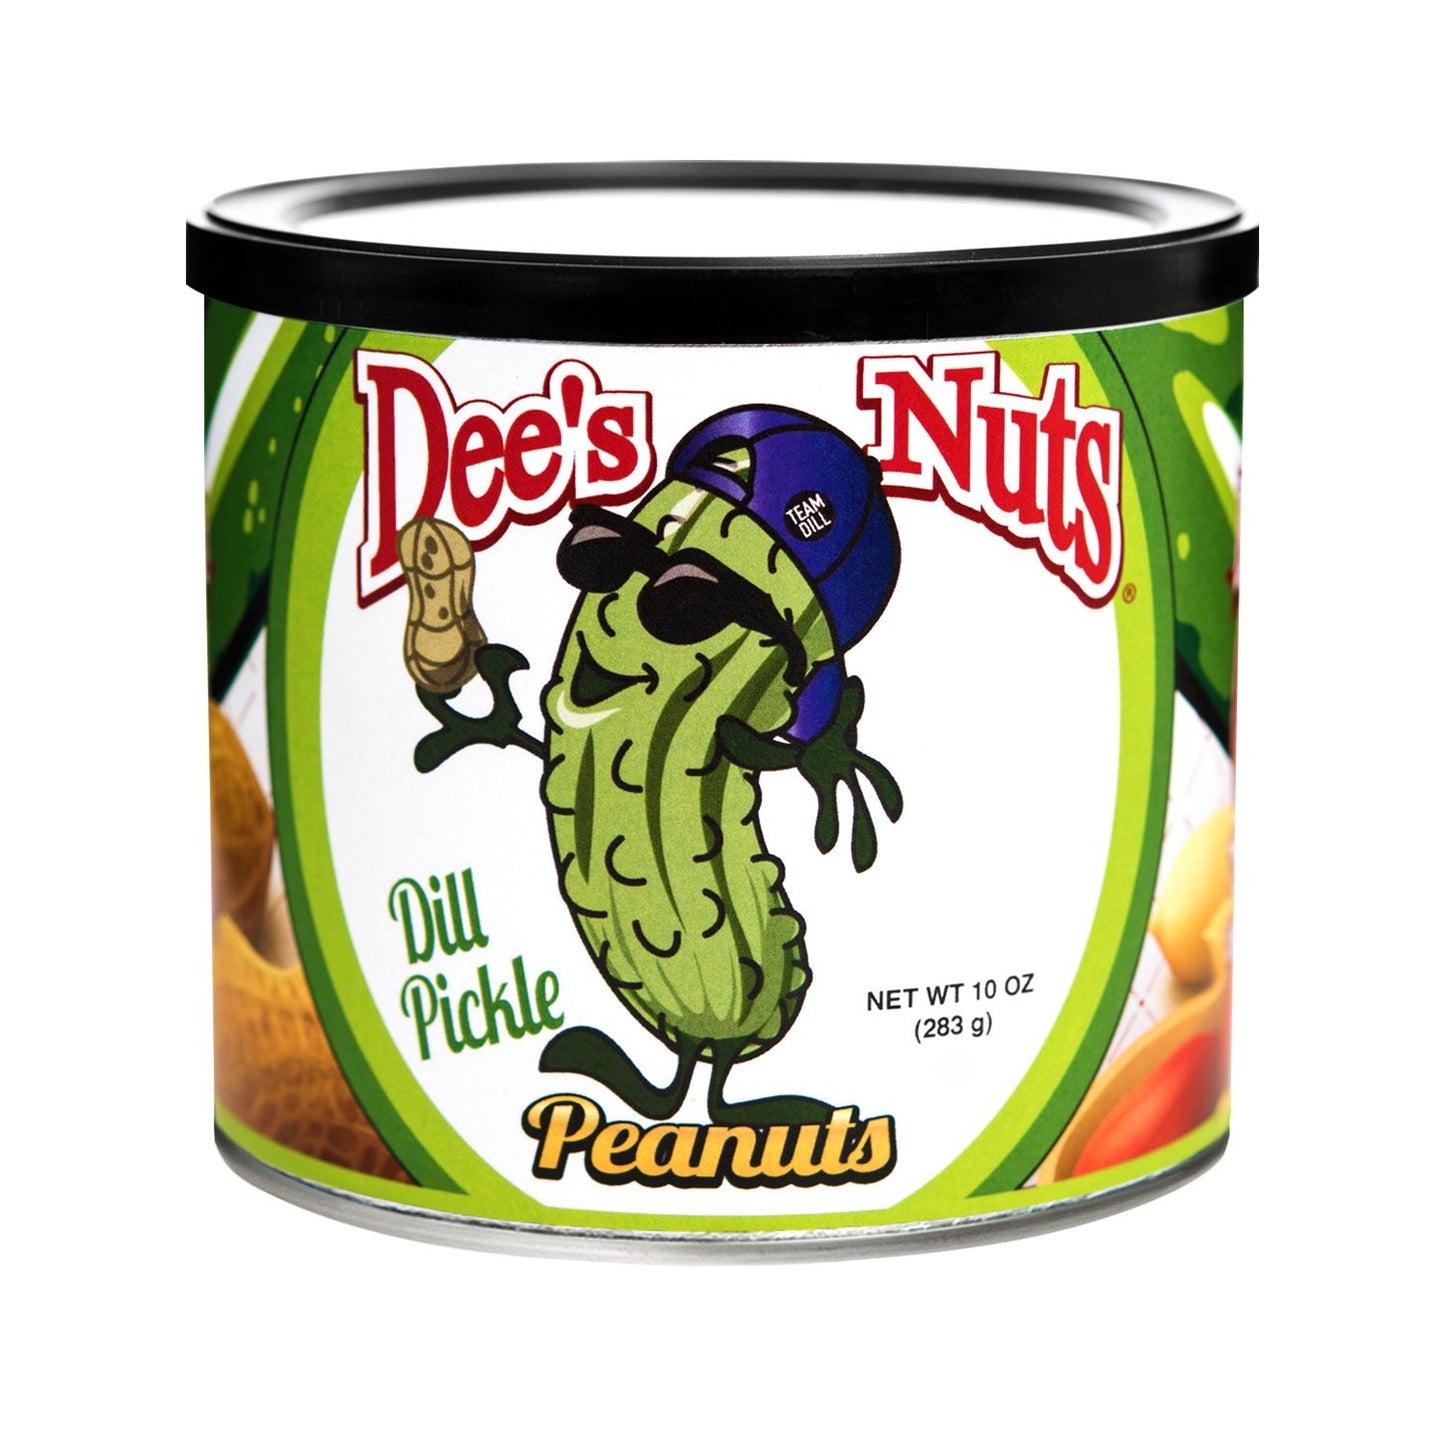 Dill Pickle Flavored Gourmet Peanuts - oddgifts.com